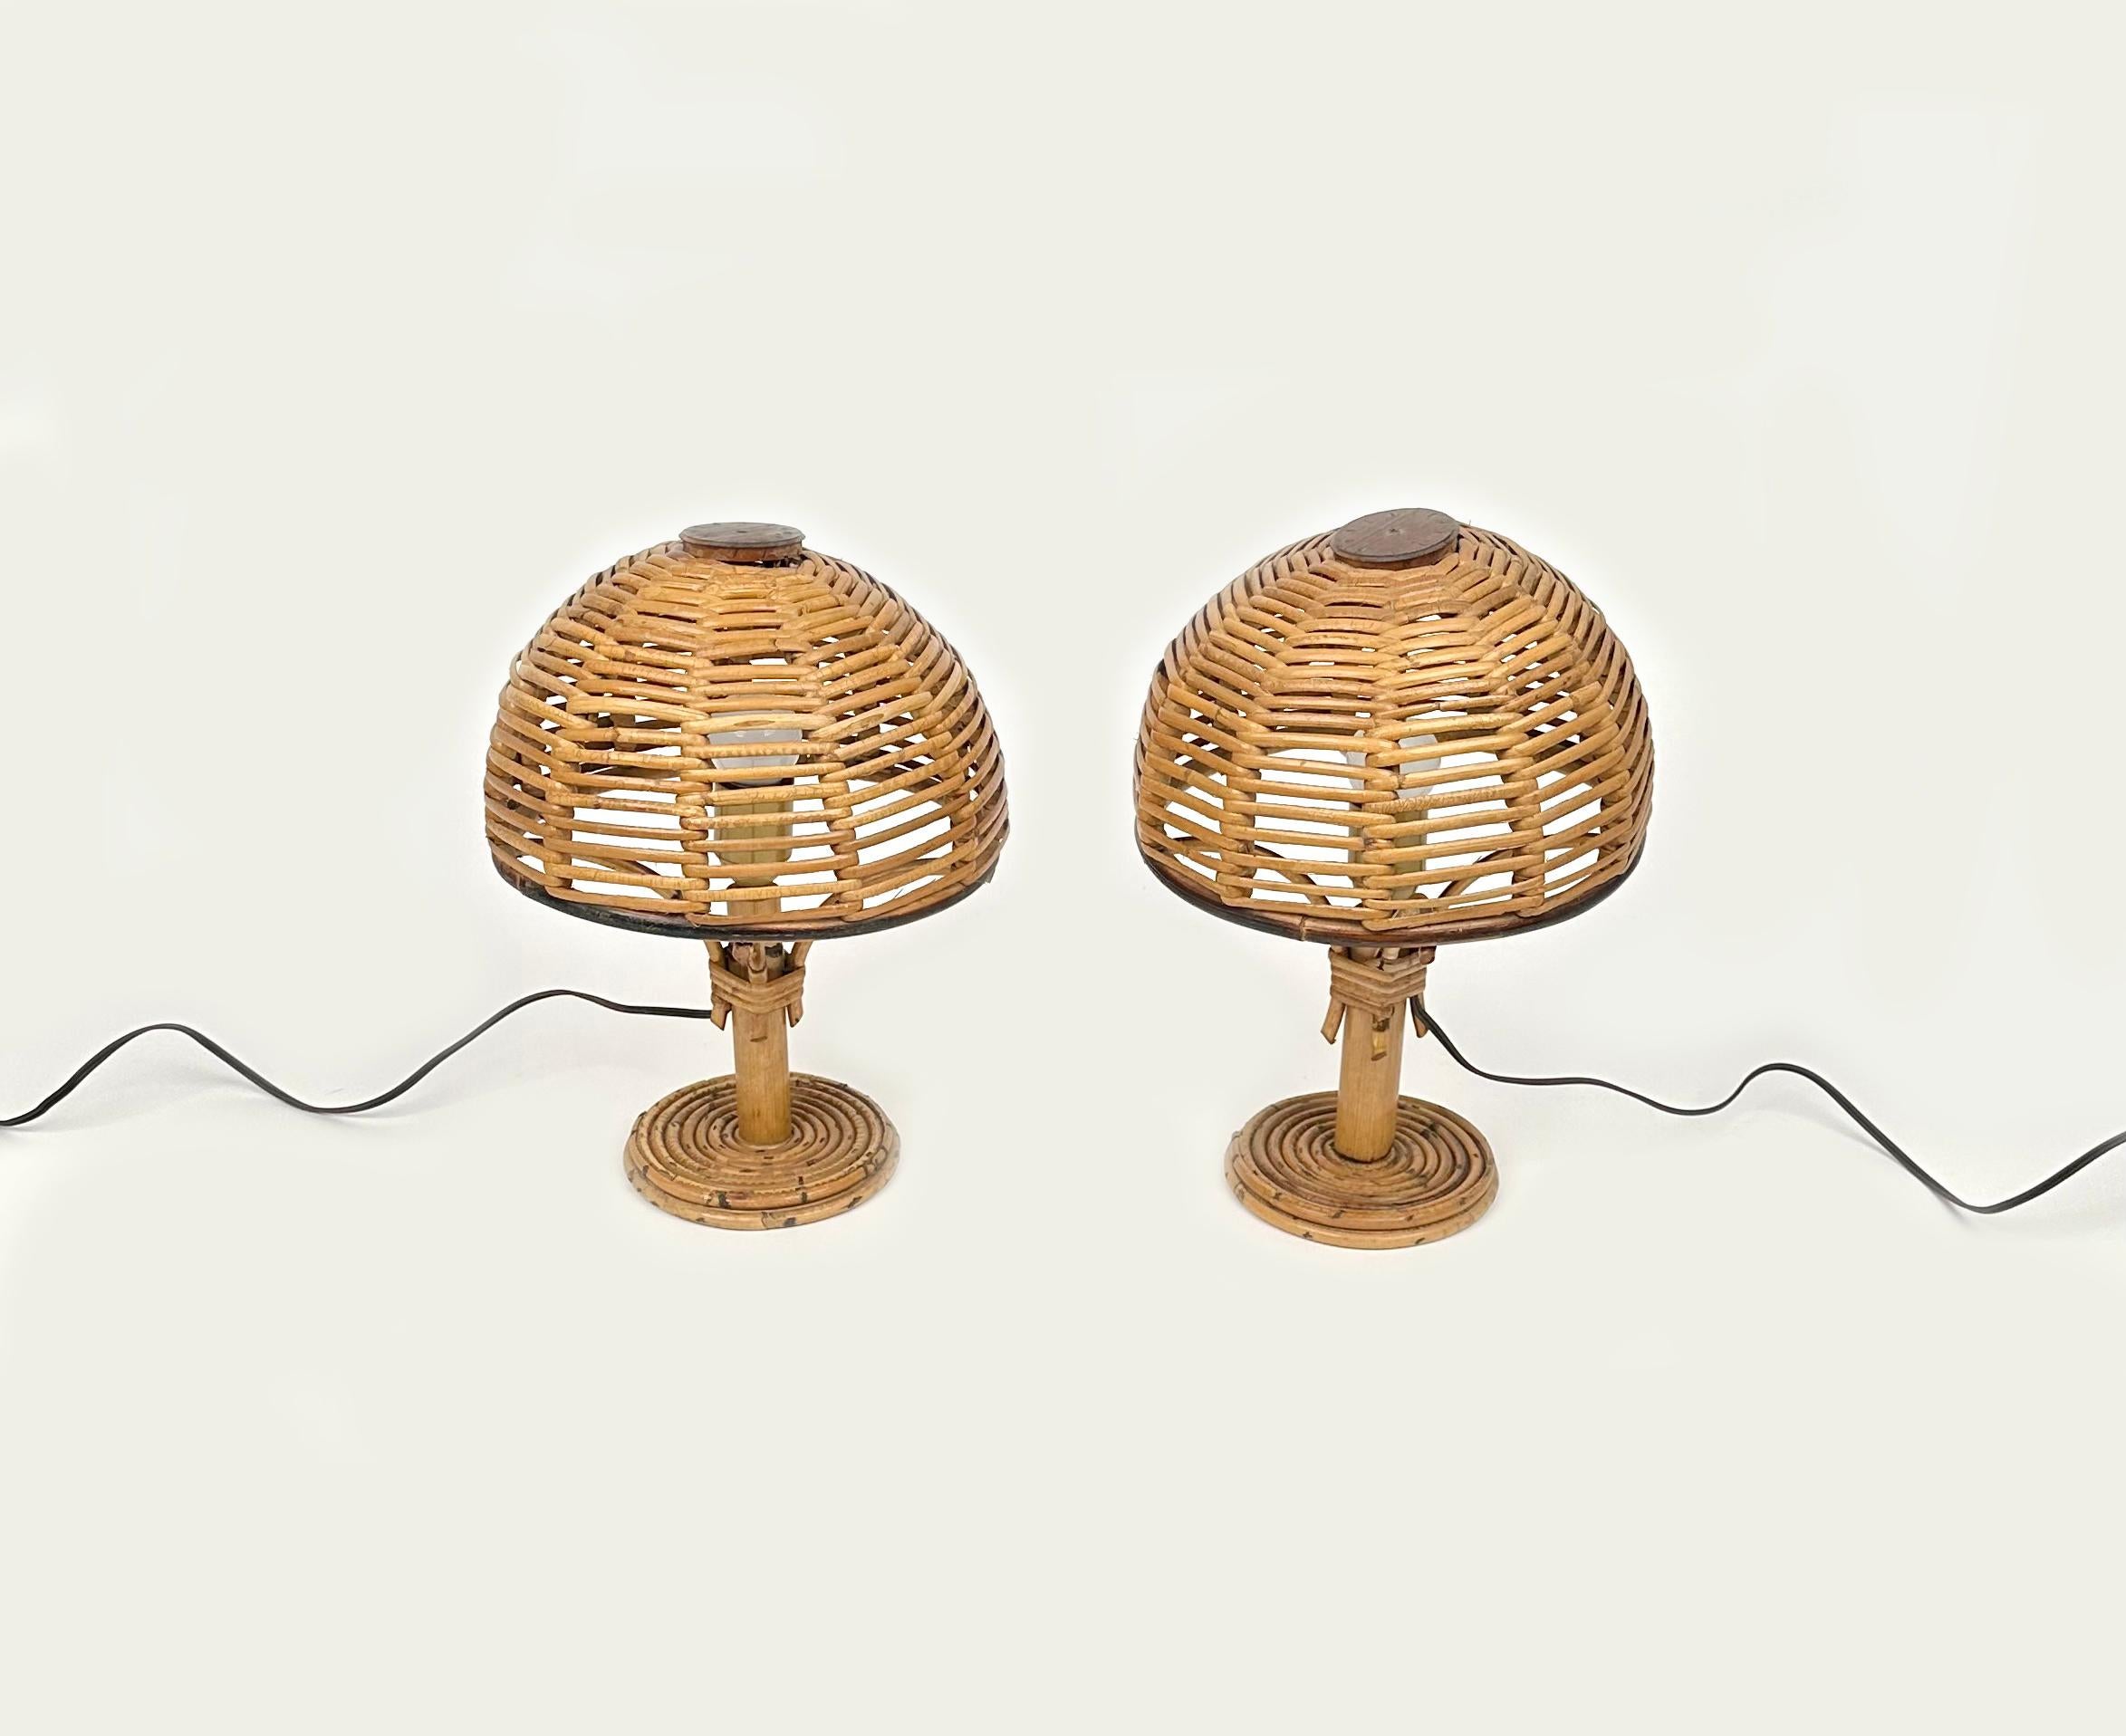 Midcentury Bamboo and Rattan Pair of Table Lamps Louis Sognot Style, Italy 1960s For Sale 7